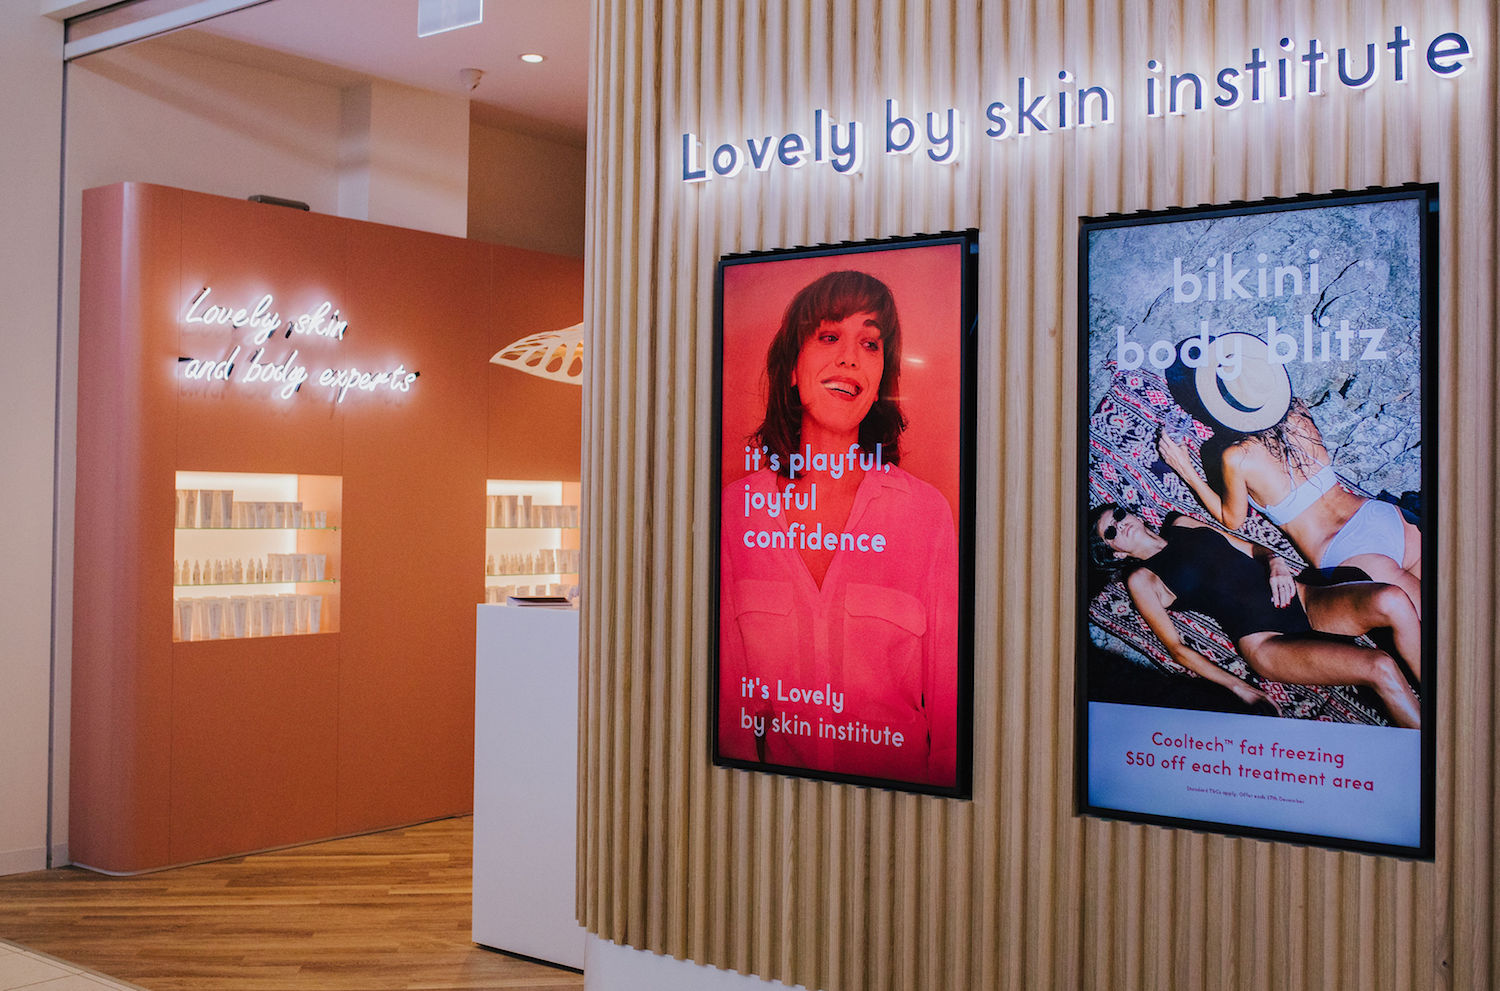 OFF & ON and Skin Institute join forces